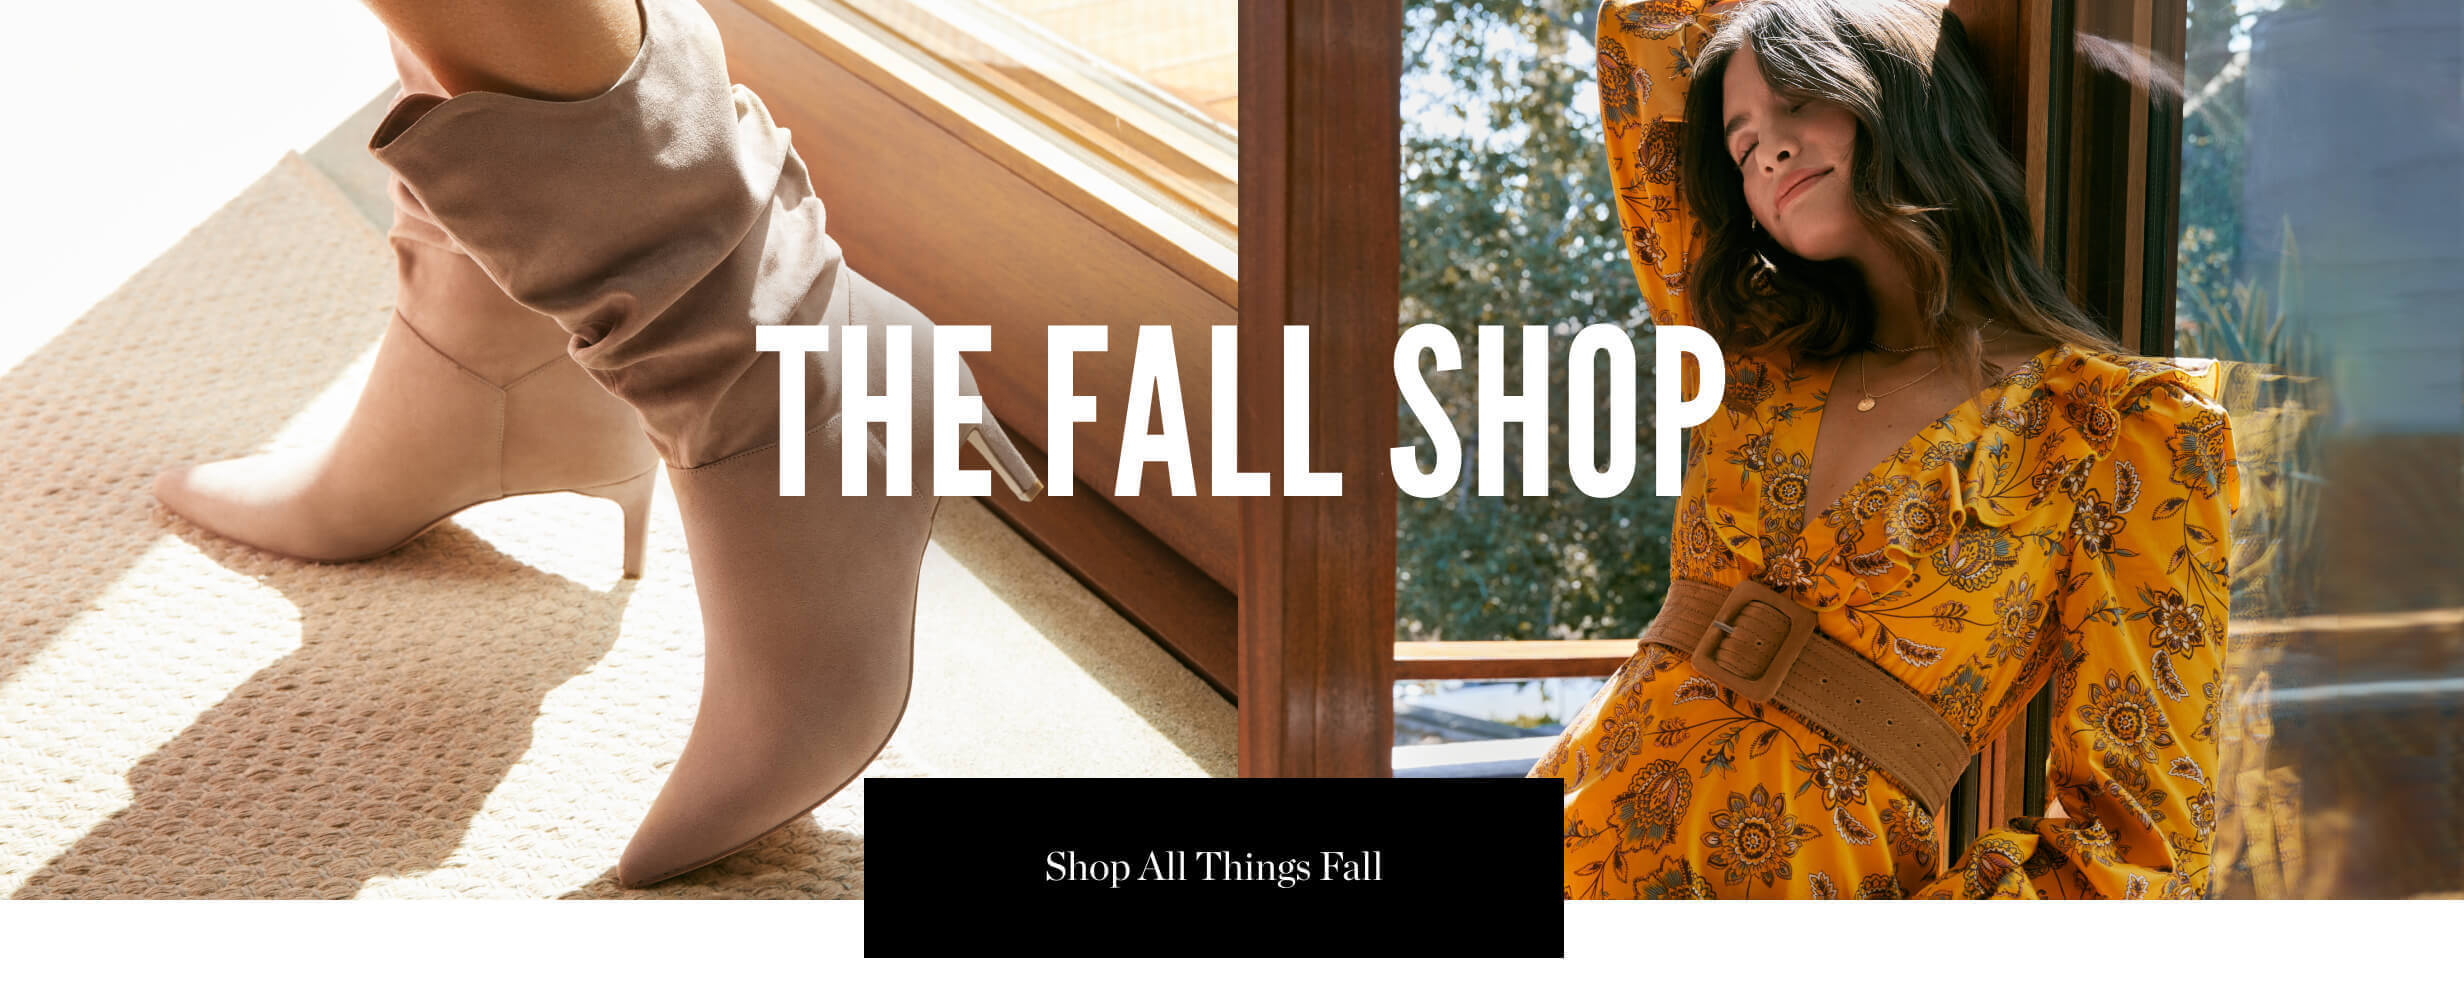 That fall feeling. The fall shop is here. Shop all things fall.